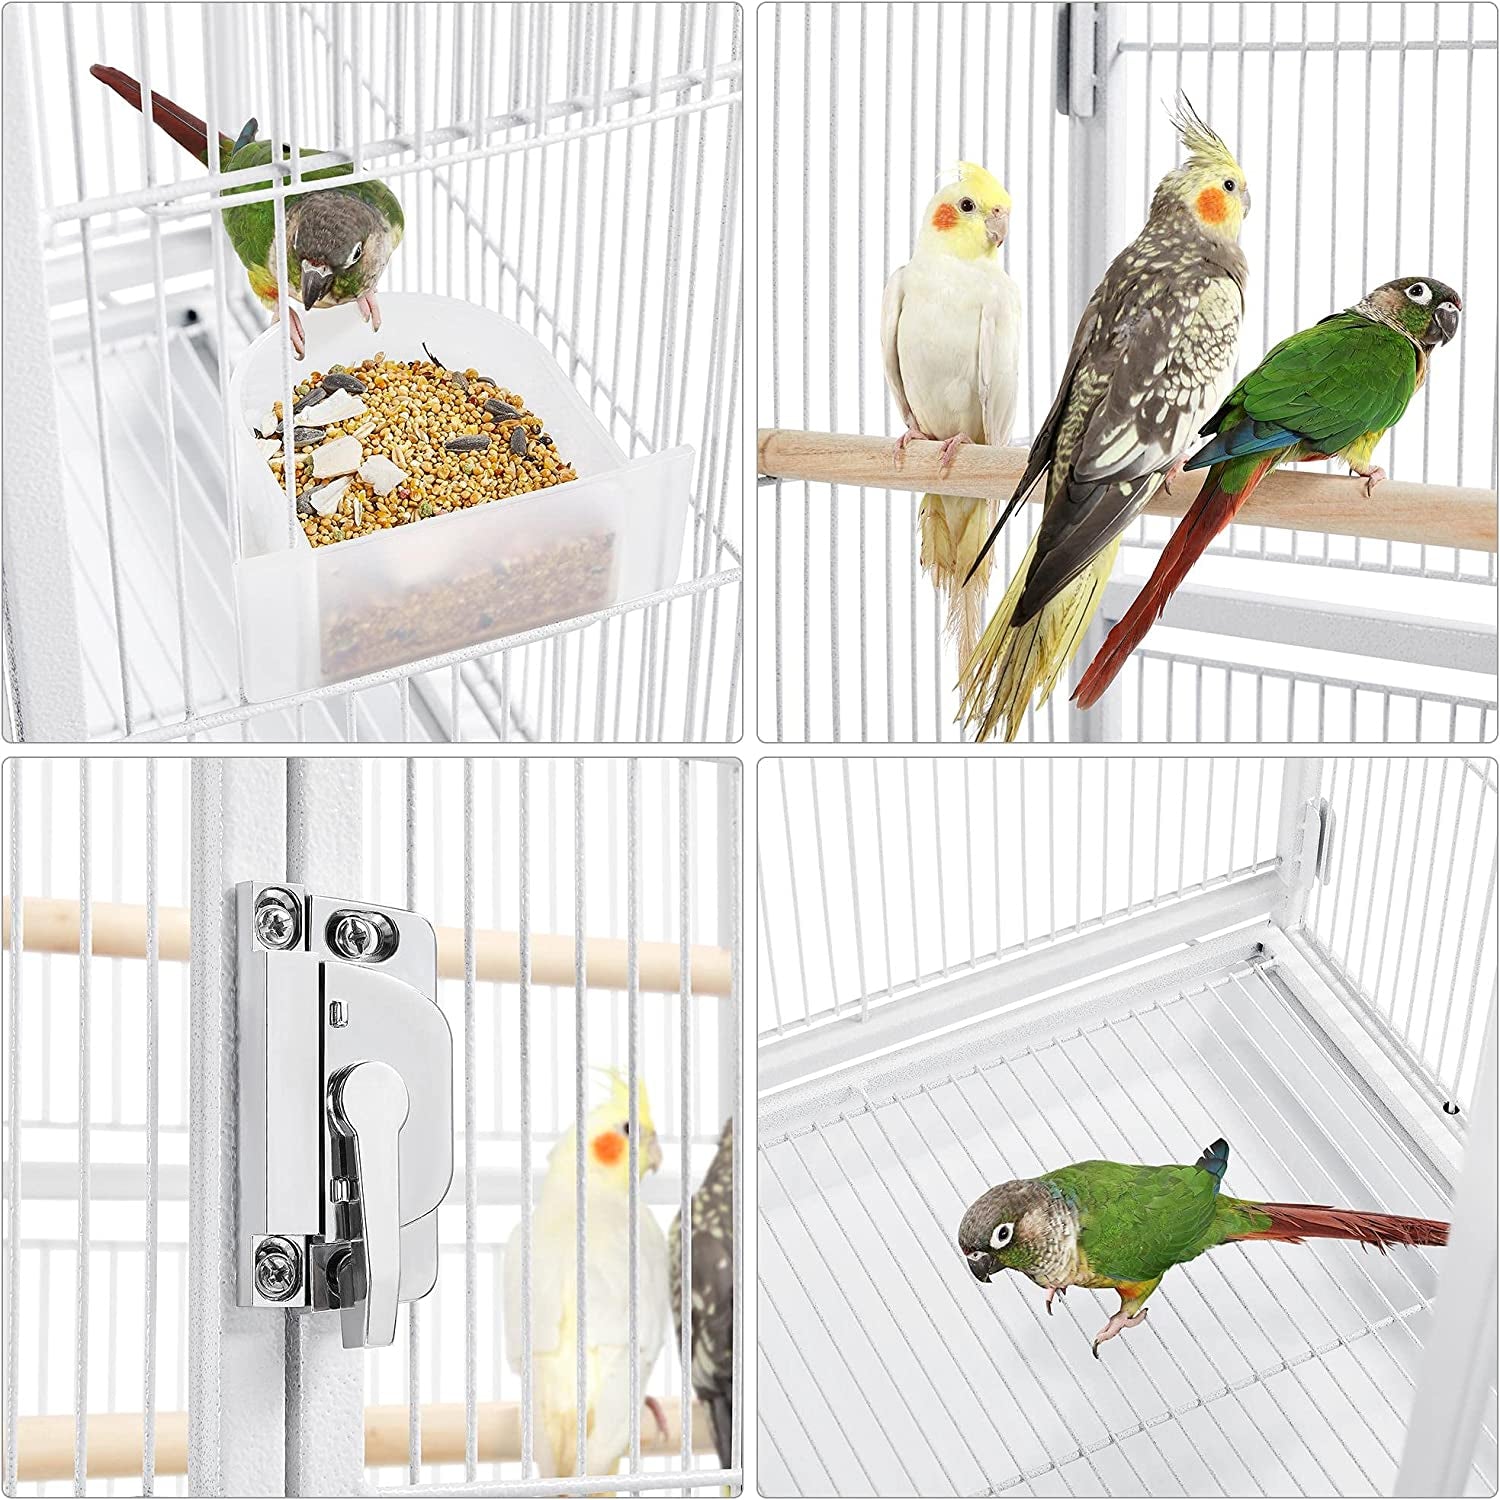 54" Large Flight Bird Cage for Parrots Macaw Cockatiels Sun Parakeets Lovebird Green Cheek Conures African Grey Small Quaker Amazon Parrots with Rolling Stand, White